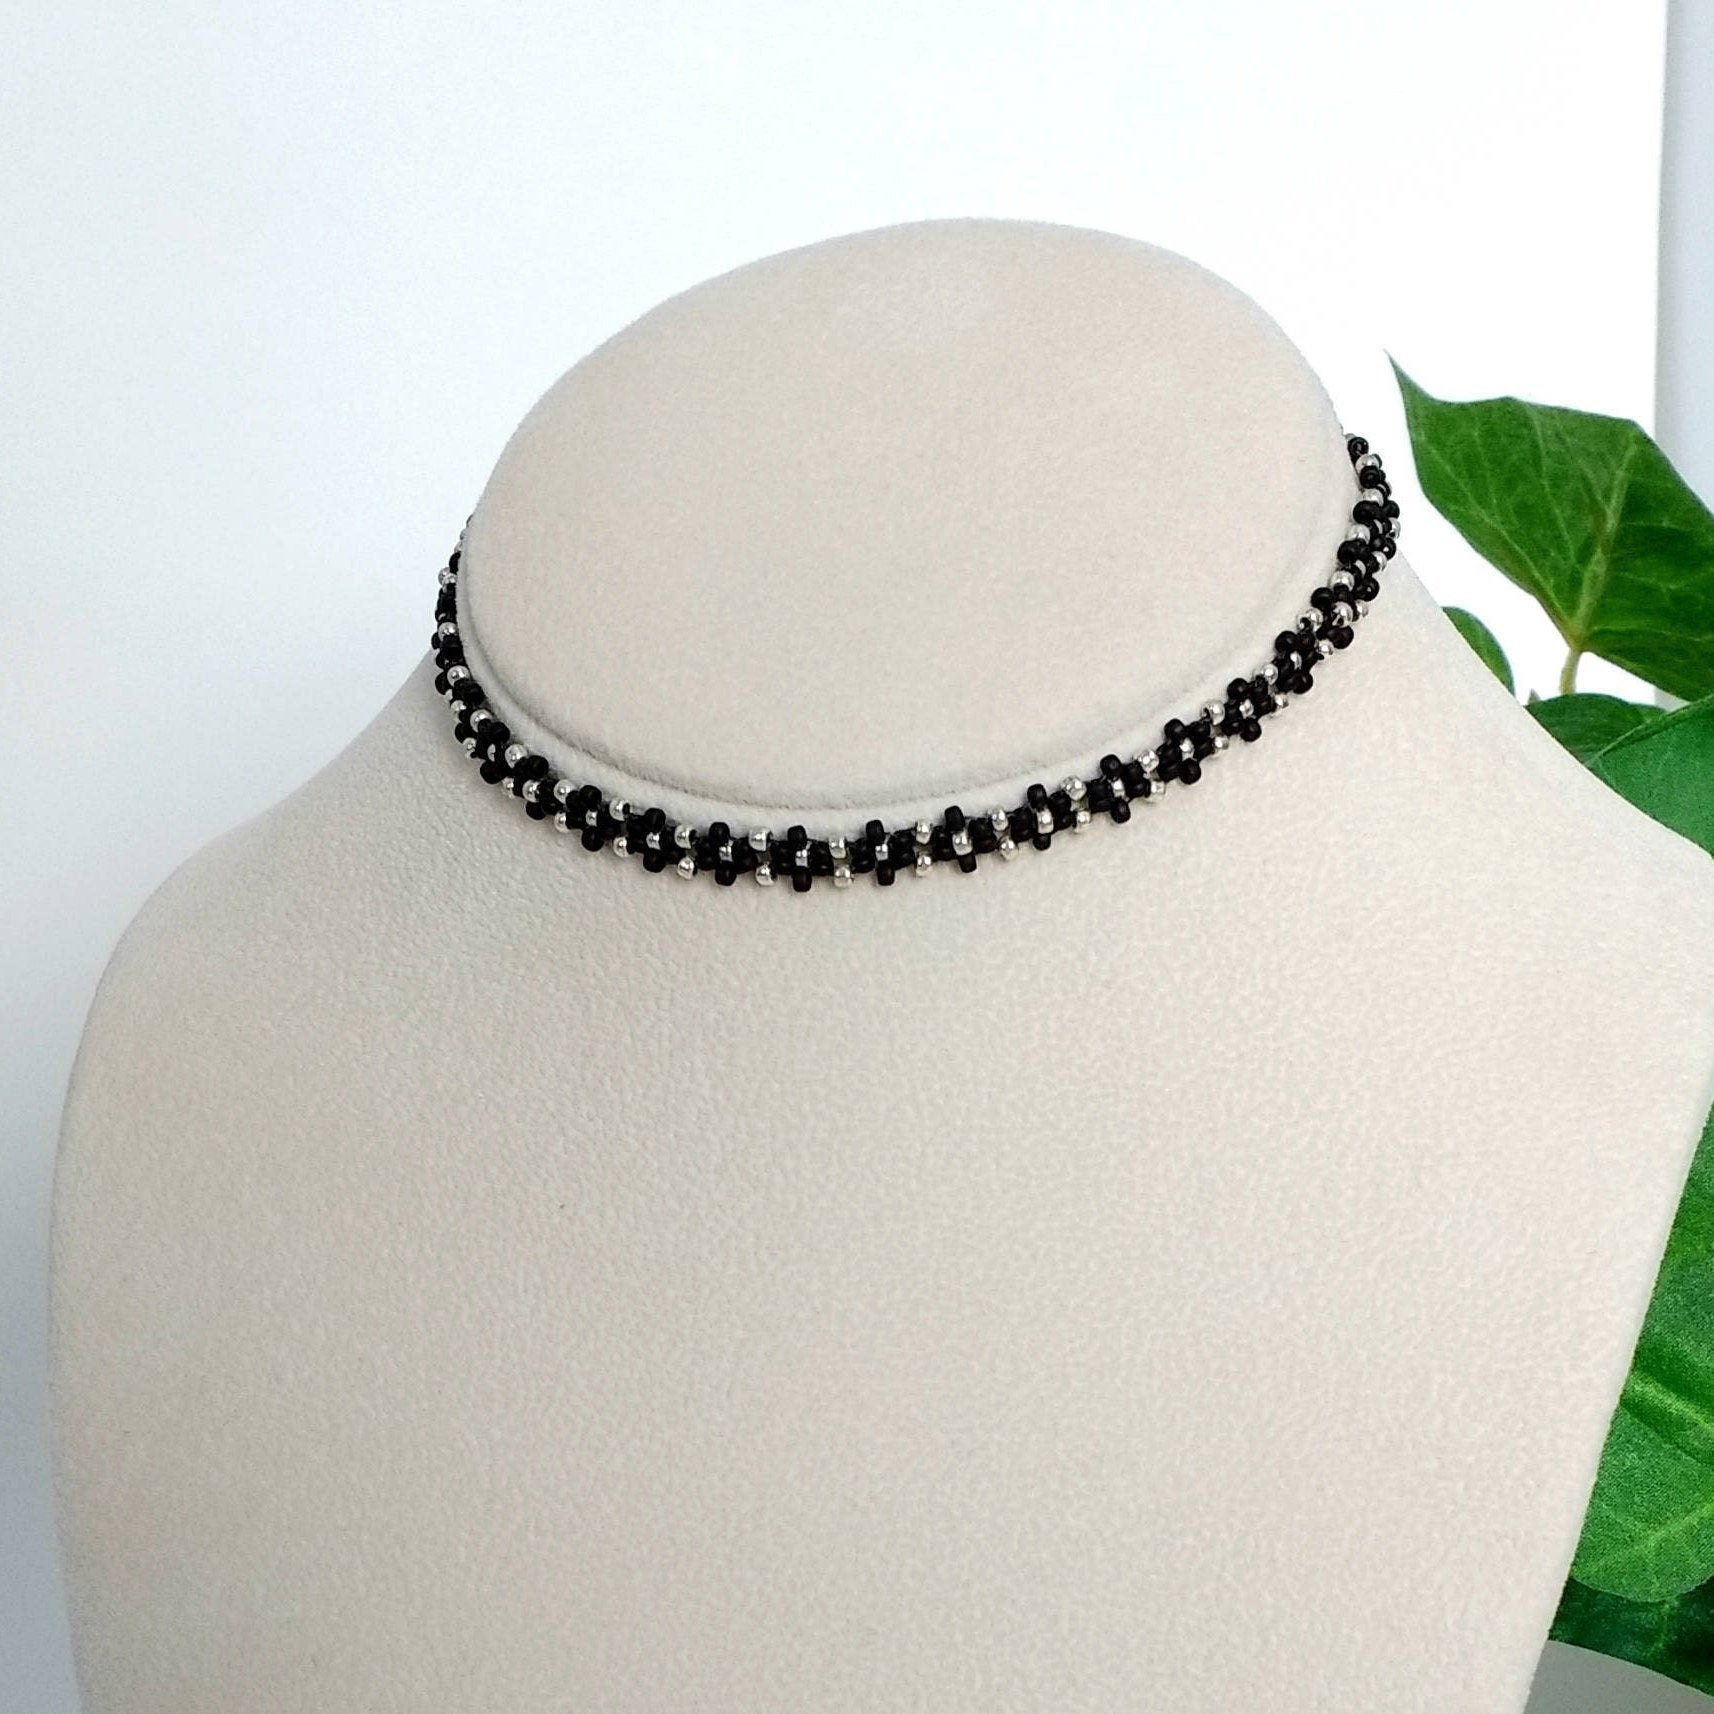 Brinote Boho Choker Necklace Chain Black Beads Necklaces Jewelry for Women  and Girls (Black)